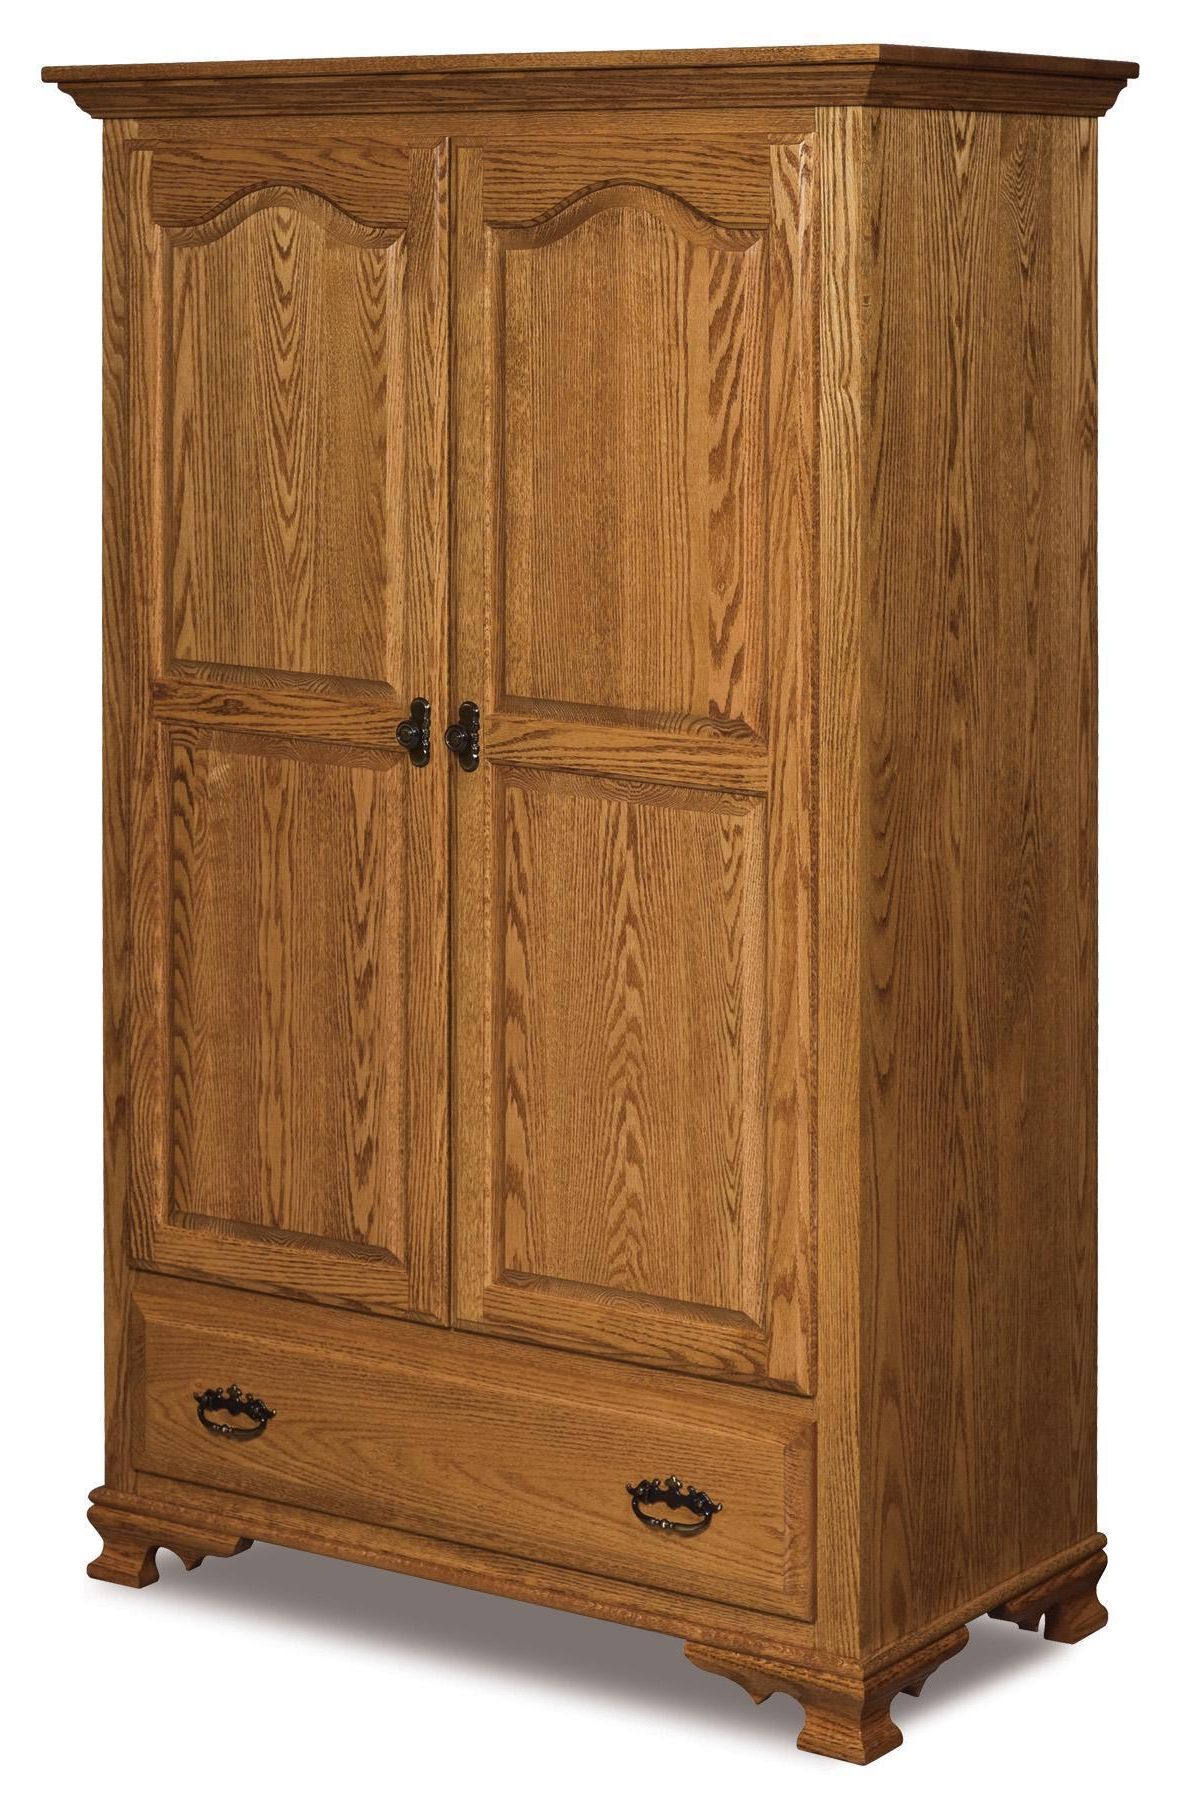 Heritage Wilma Wardrobe Armoire From Dutchcrafters Amish Furniture Regarding Old Fashioned Wardrobes (View 8 of 20)